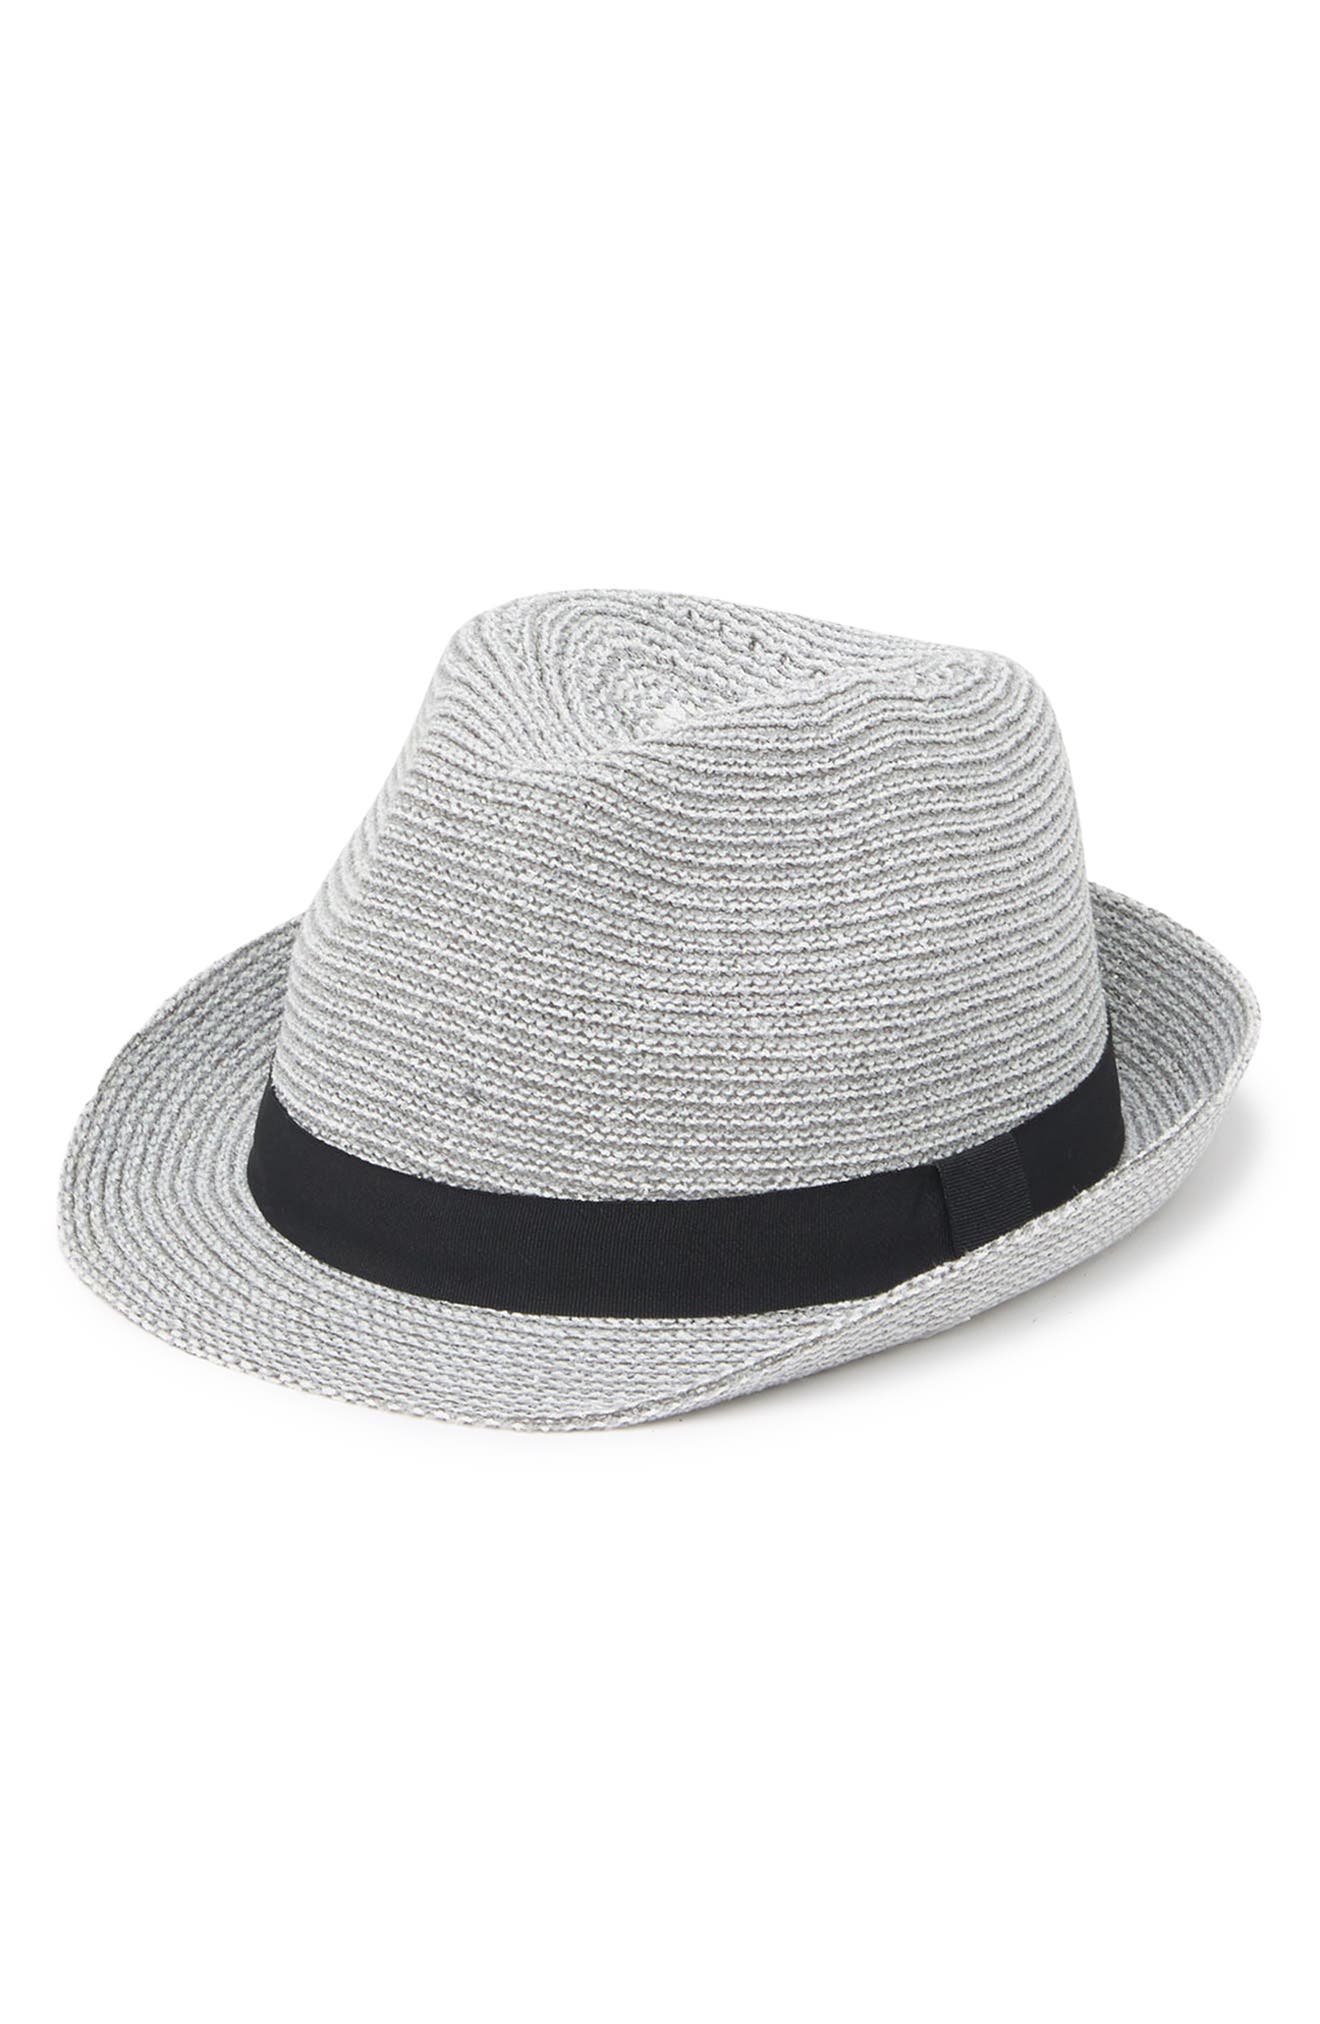 Abound Packable Fedora In Black Combo